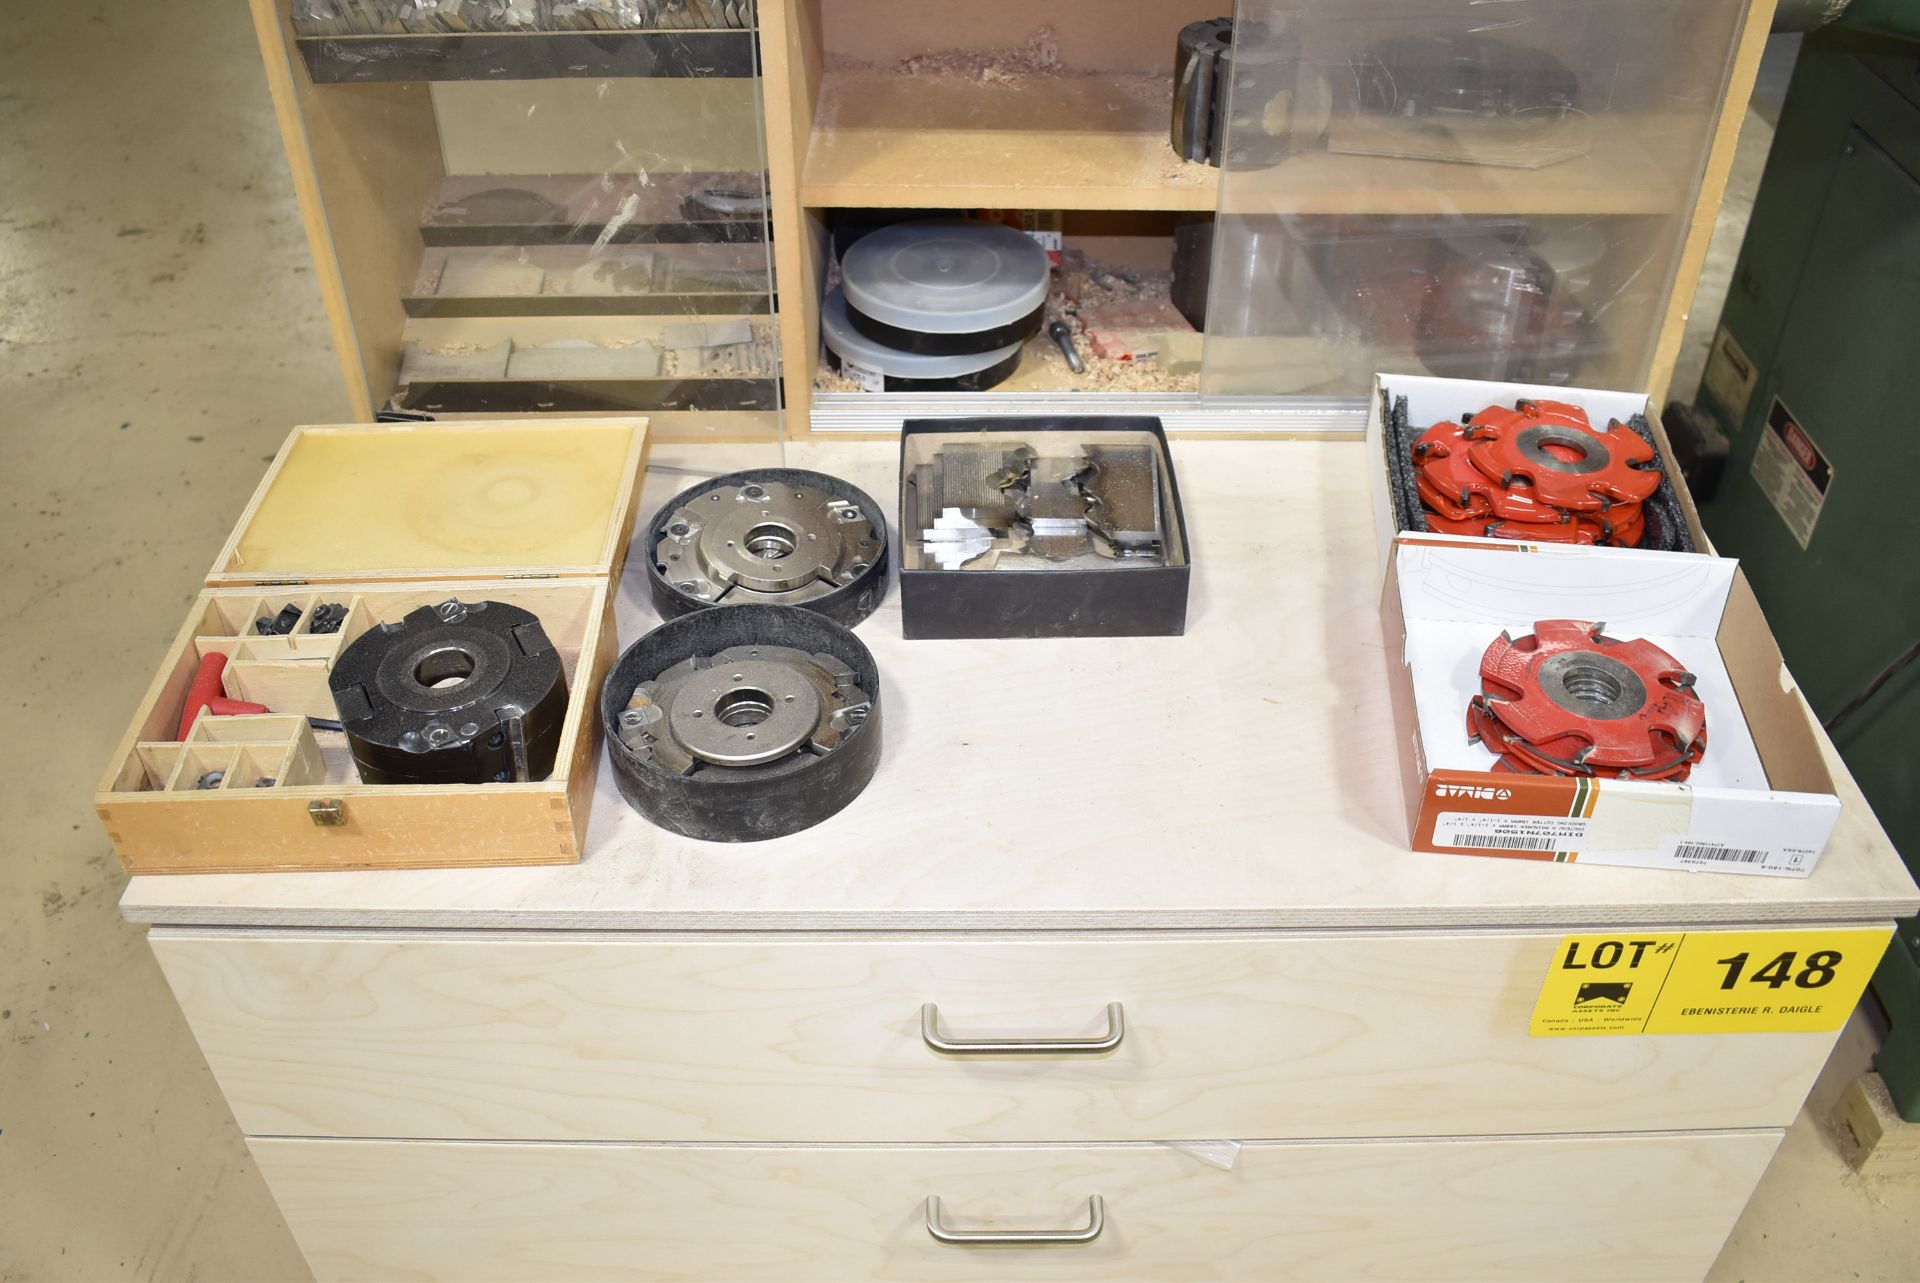 LOT/ CABINET WITH CONTENTS CONSISTING OF CUTTERS, SHAPER ACCESSORIES AND POWERFEED COMPONENTS [ - Image 2 of 8